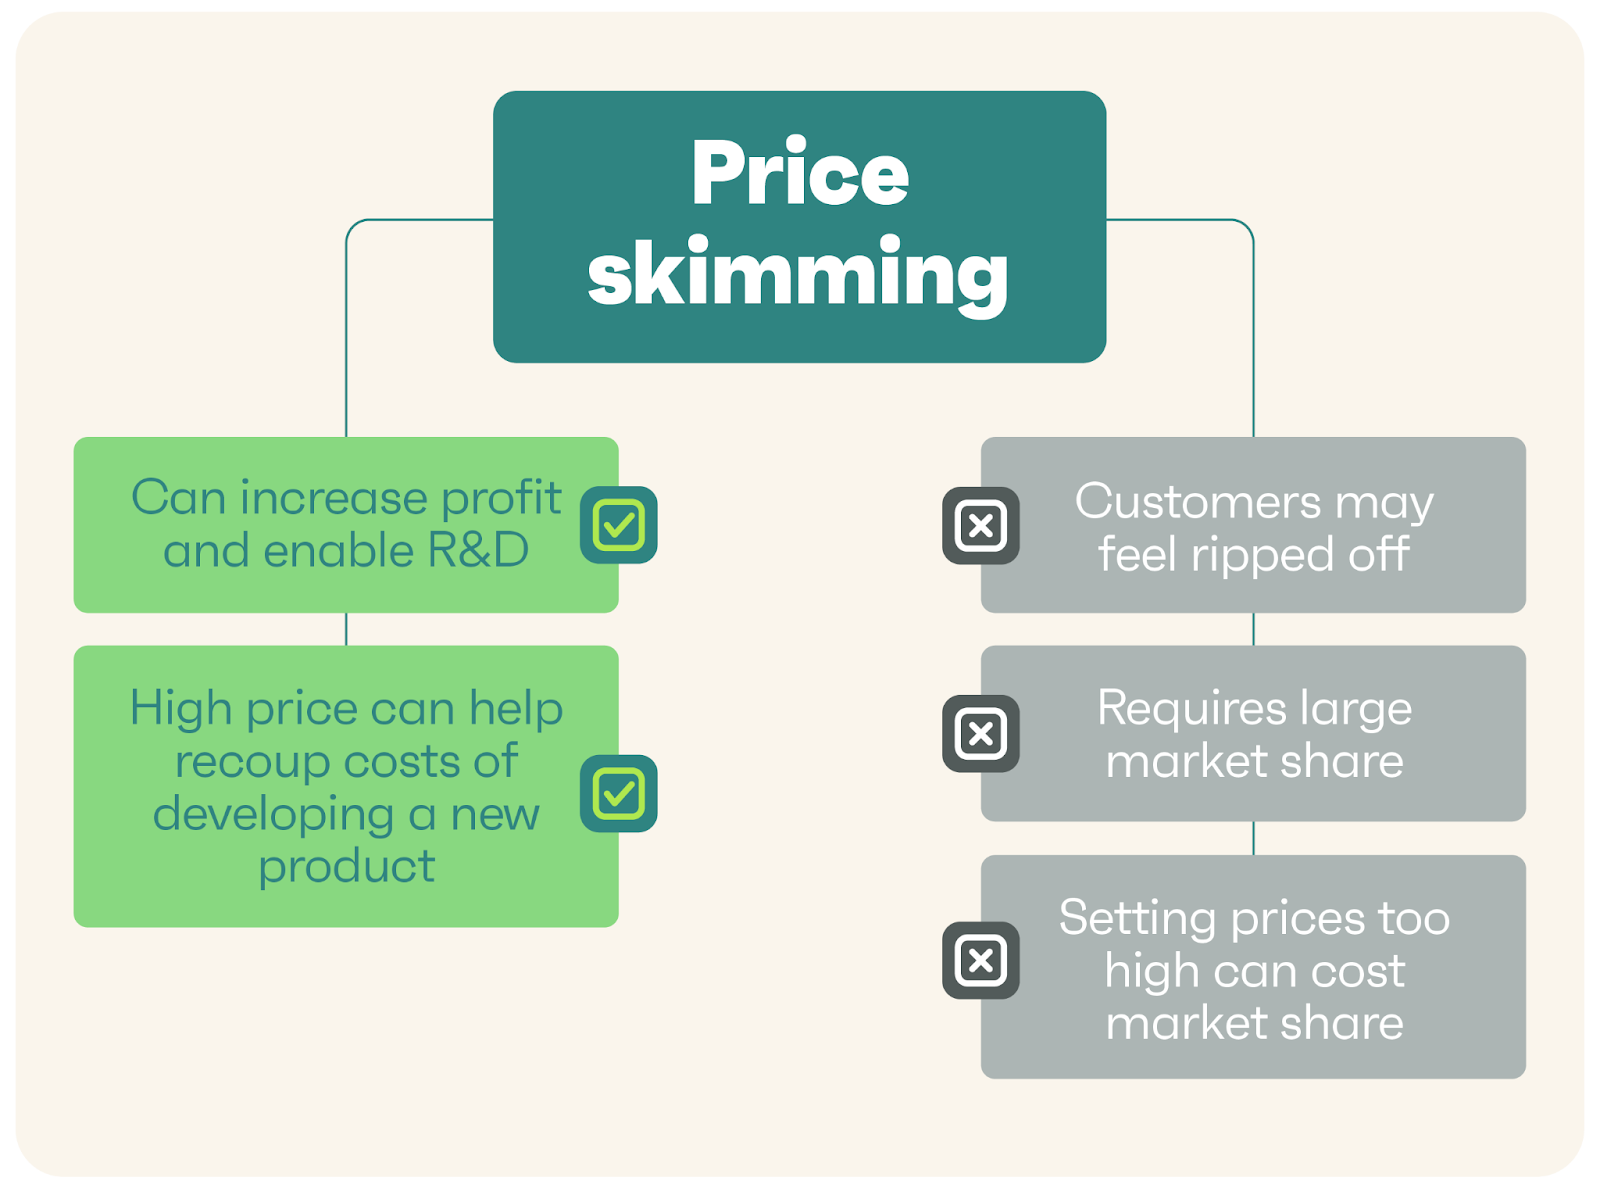 Price skimming pros and cons